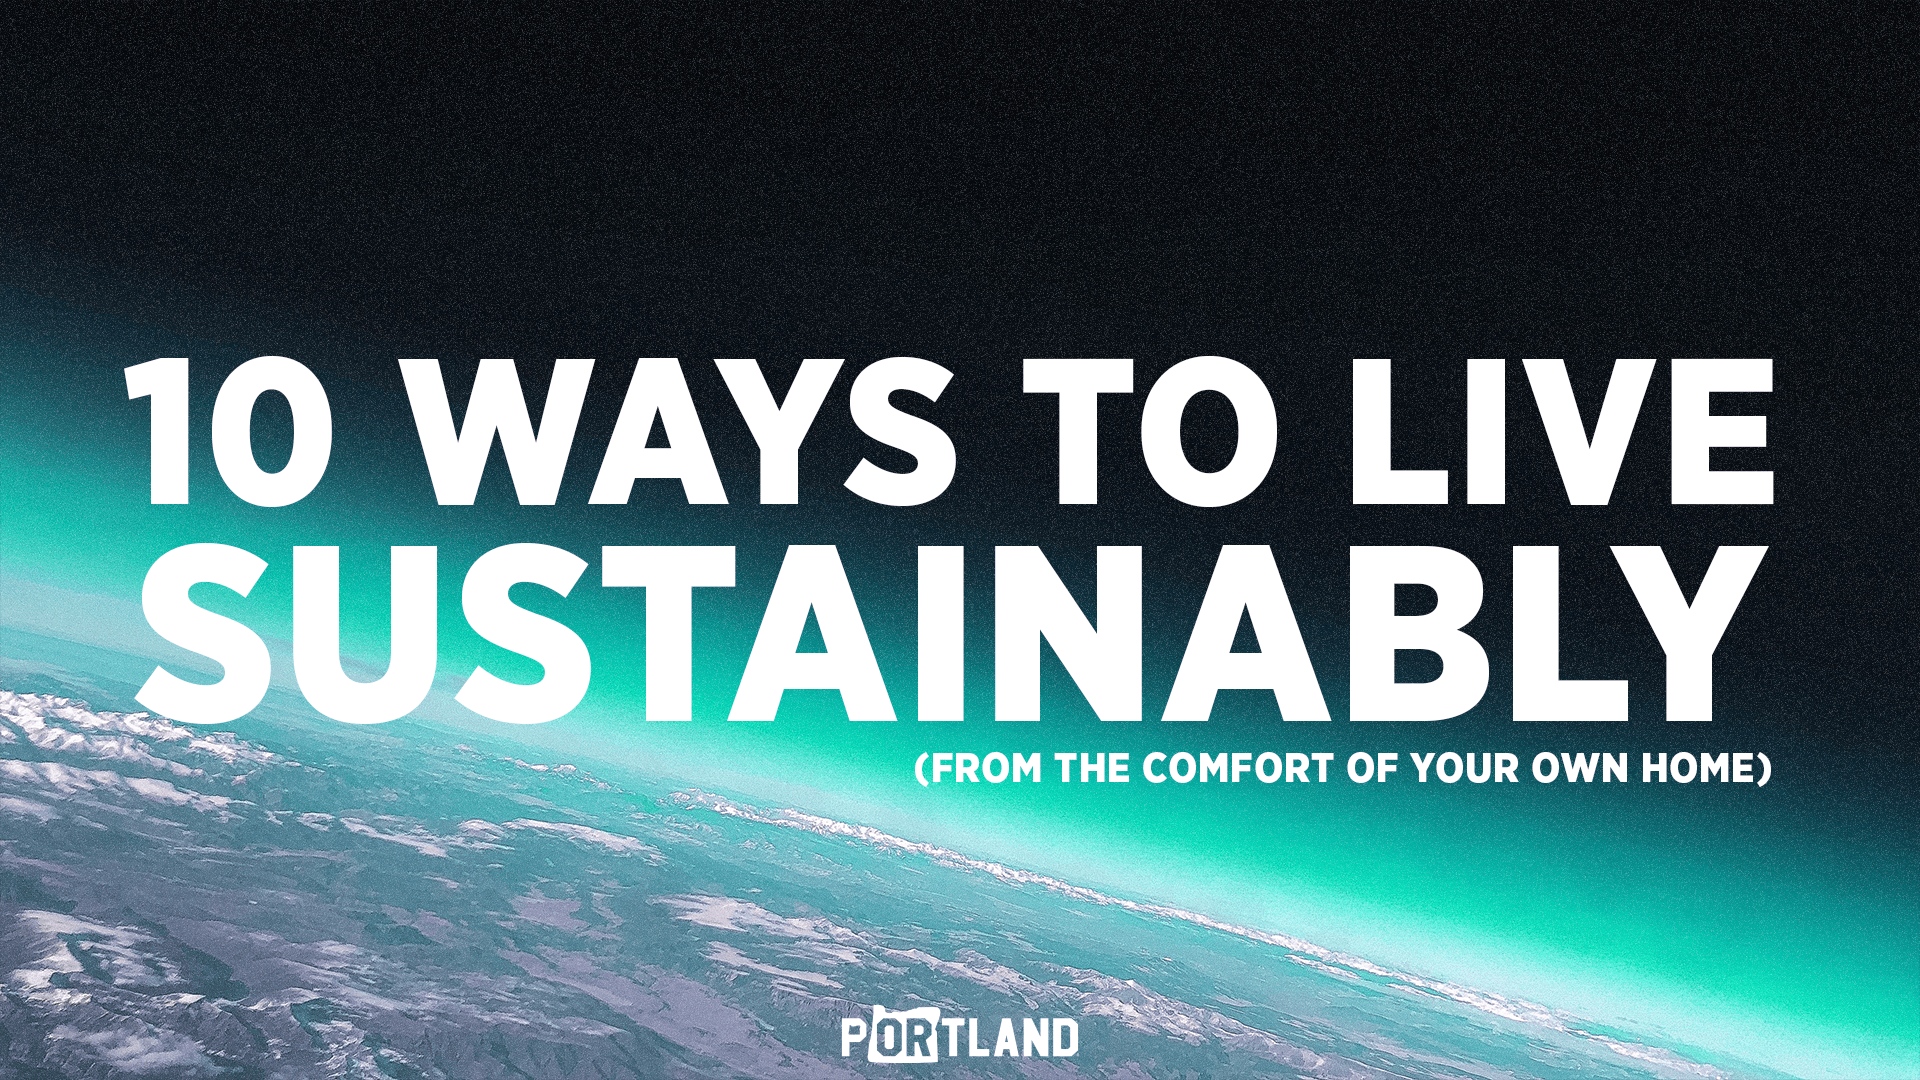 10 Things You Can Do For The Planet From Home. - Portland Gear